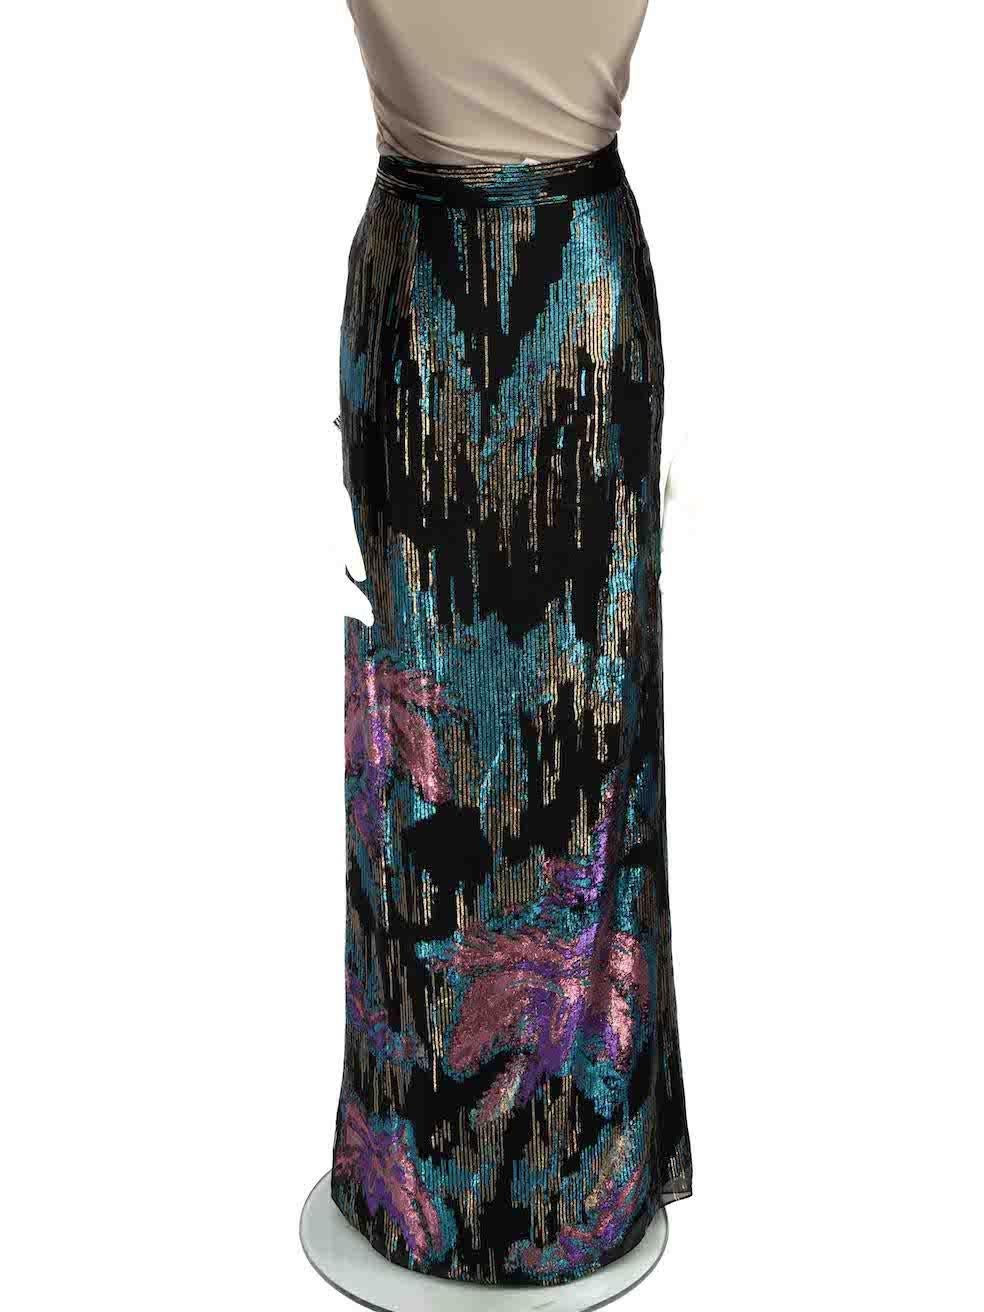 Peter Pilotto Metallic Pattern Silk Maxi Skirt Size XXL In Good Condition For Sale In London, GB